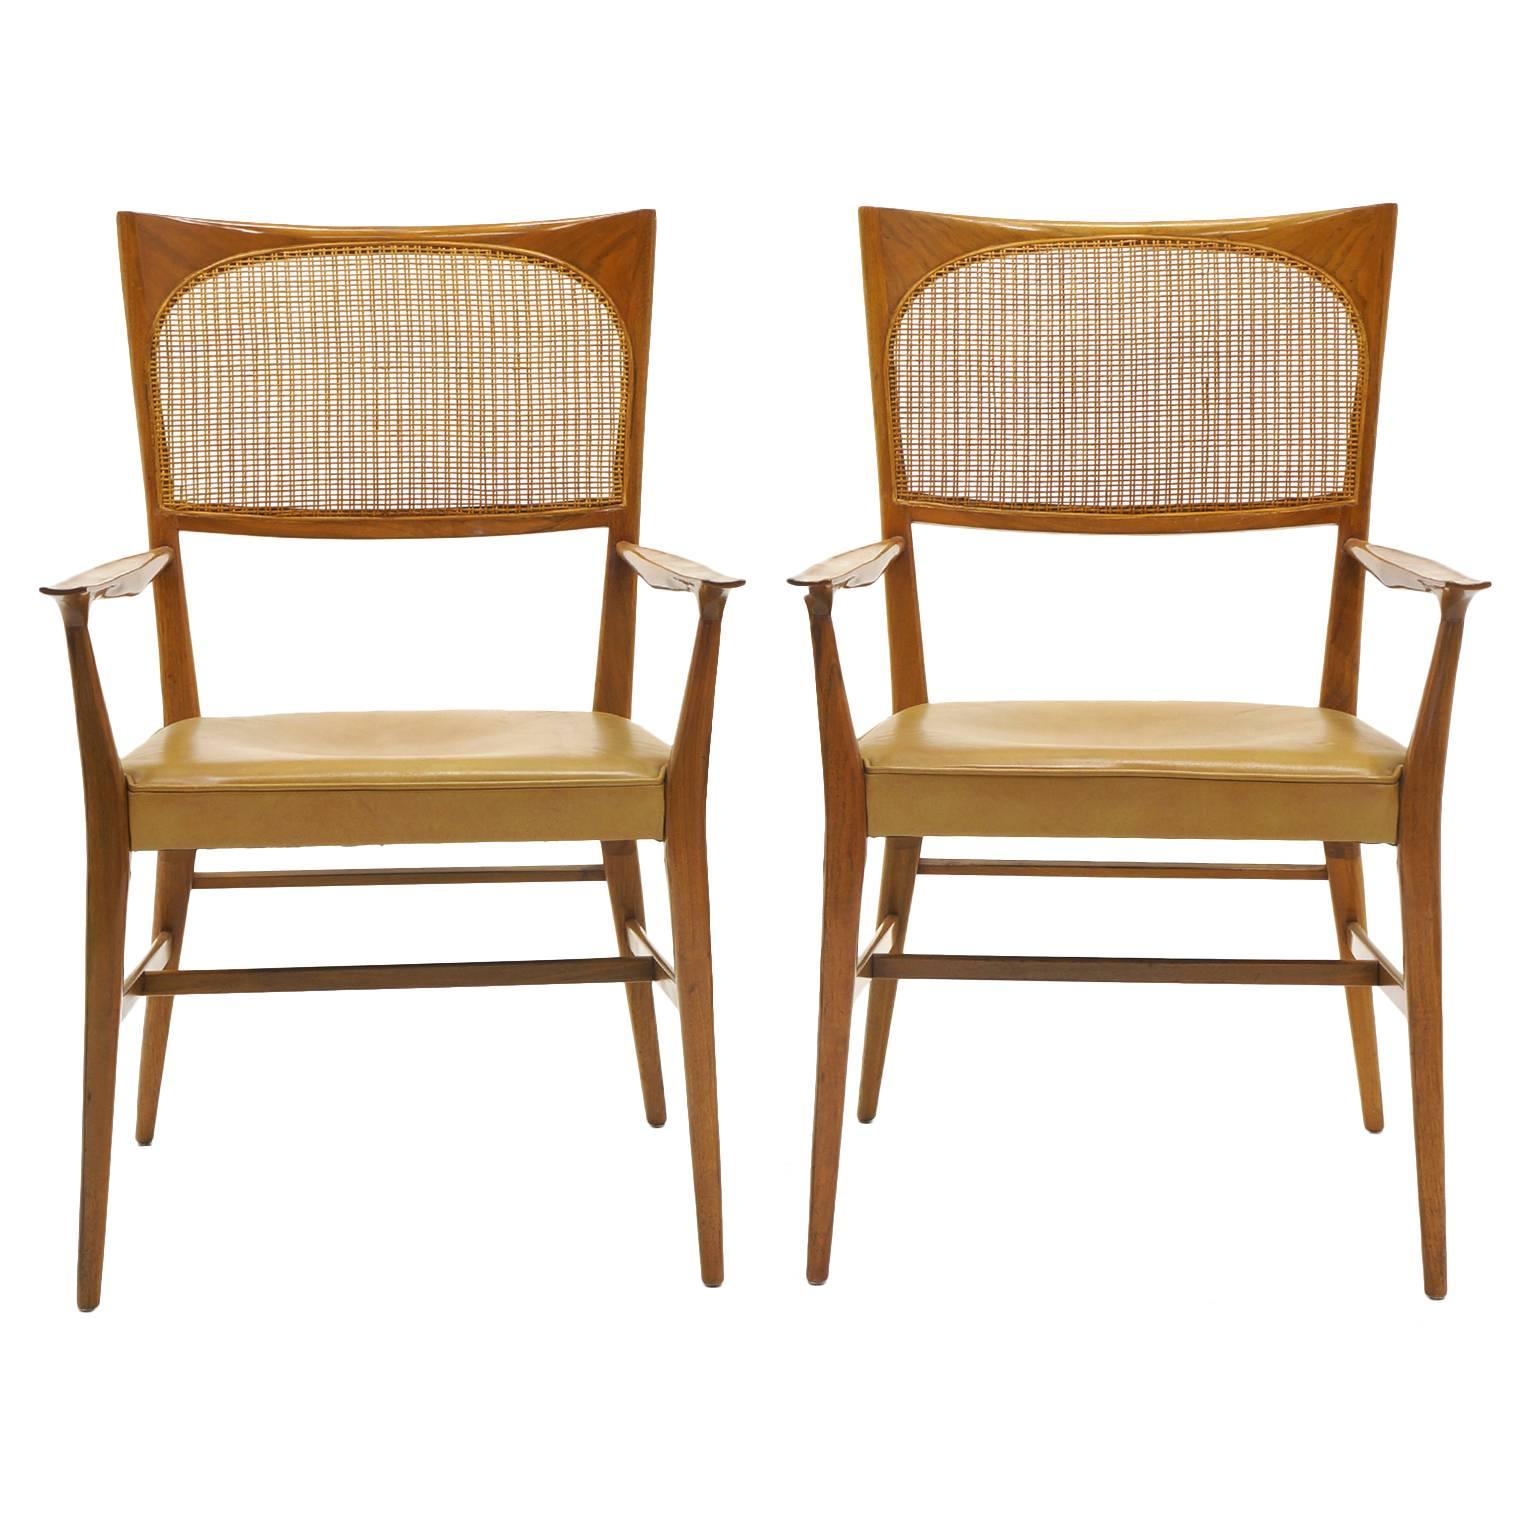 Pair of Paul McCobb Dining chairs from The New England Collection.